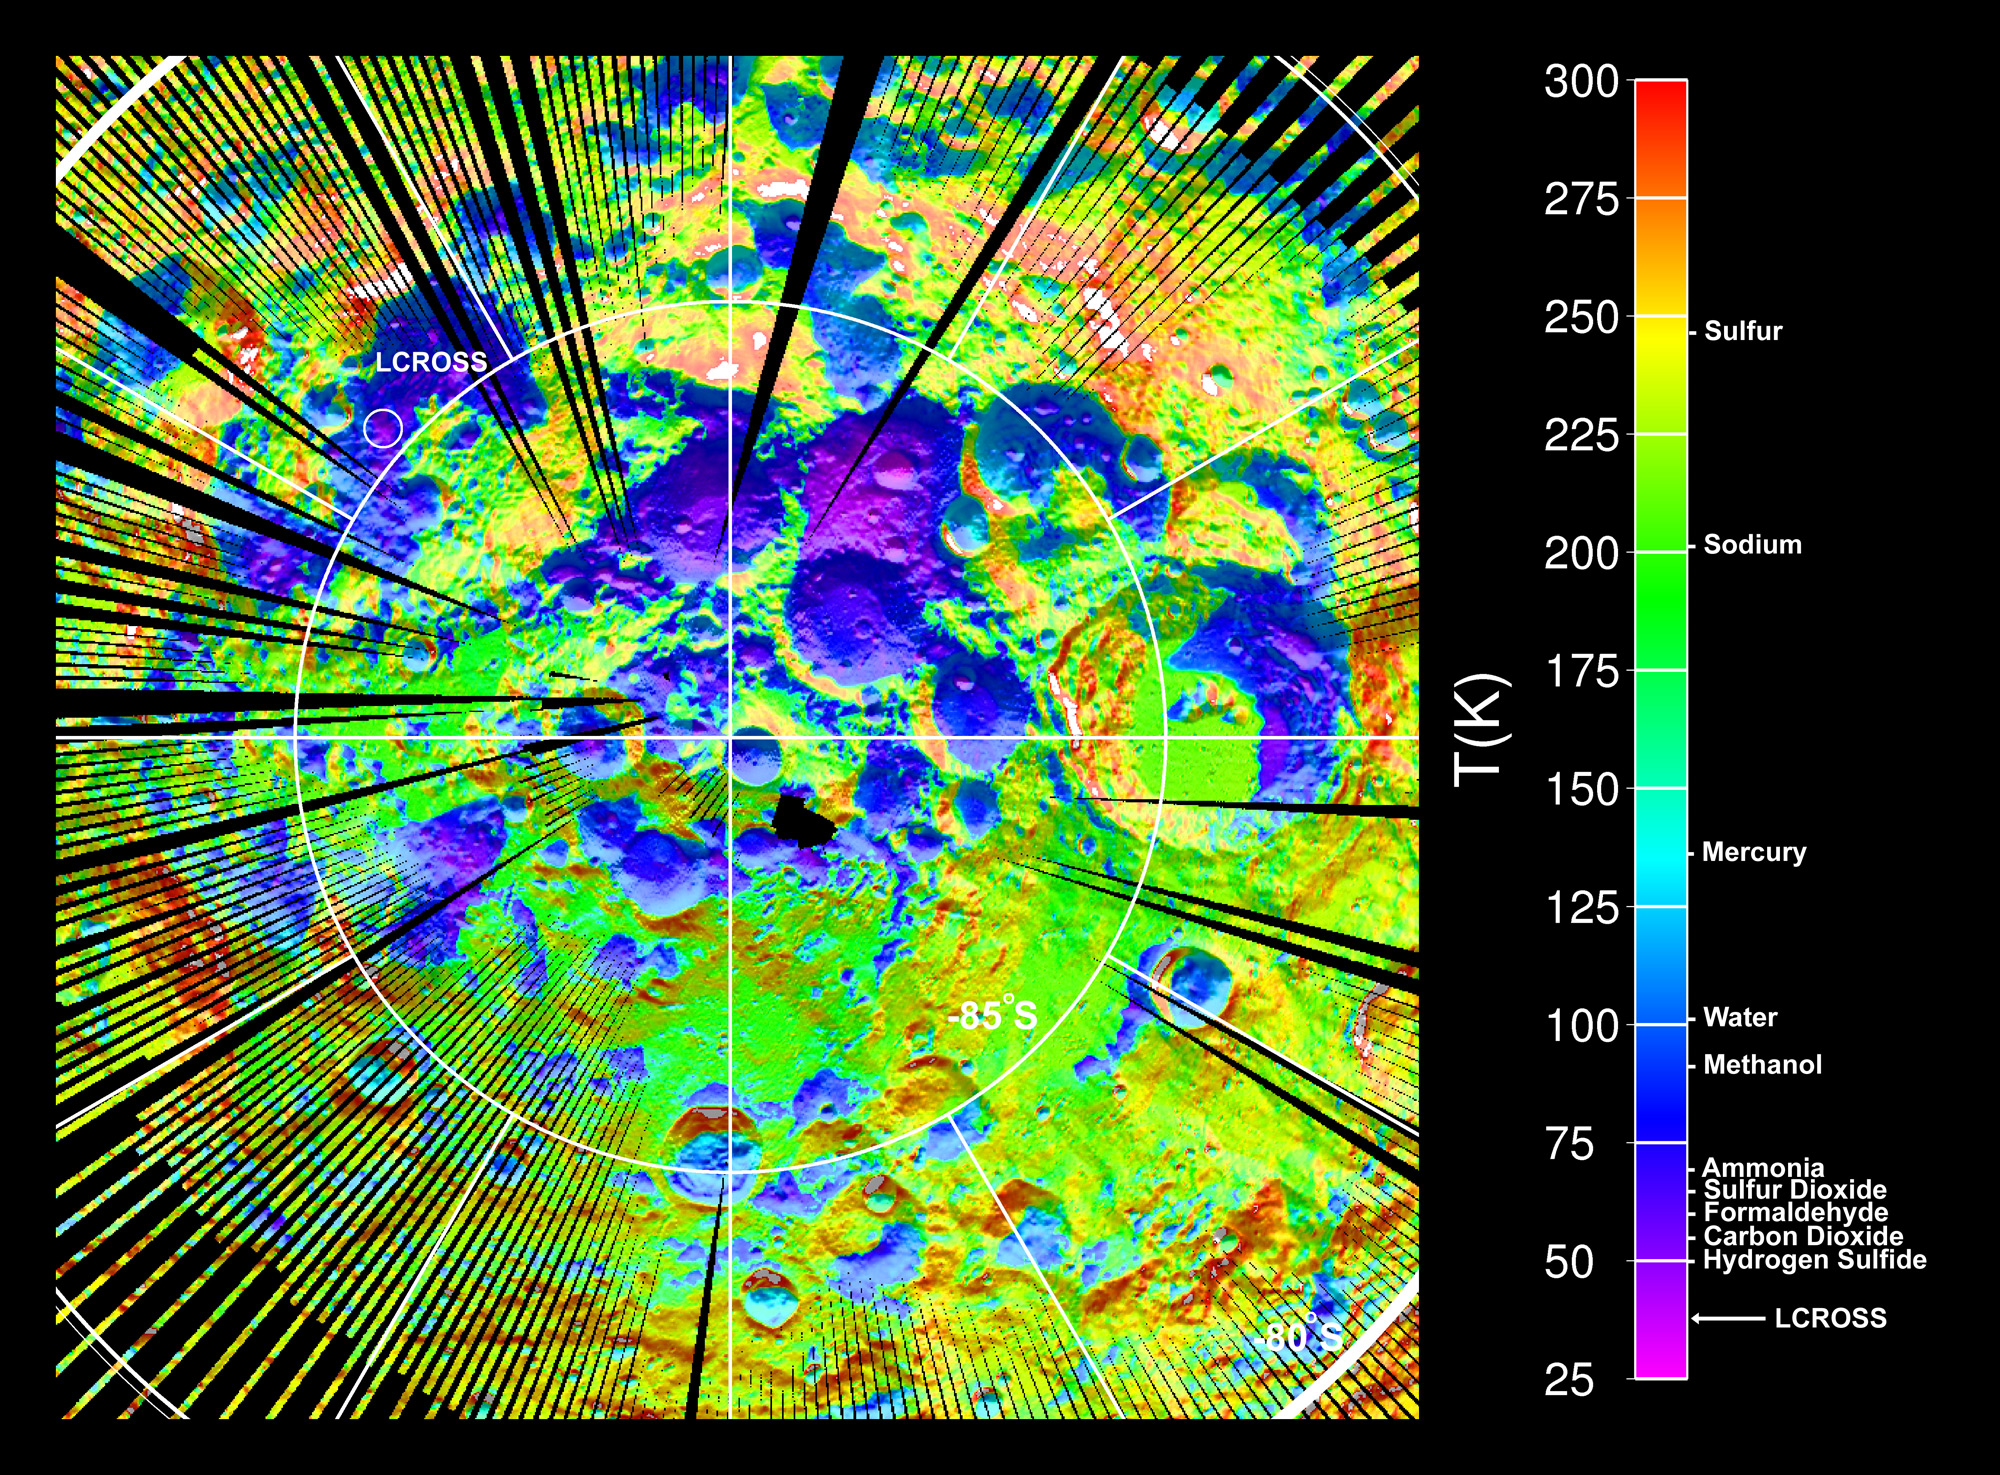 Bright greens, purples and red indicate temperatures of craters on a section of the Moon in this data image